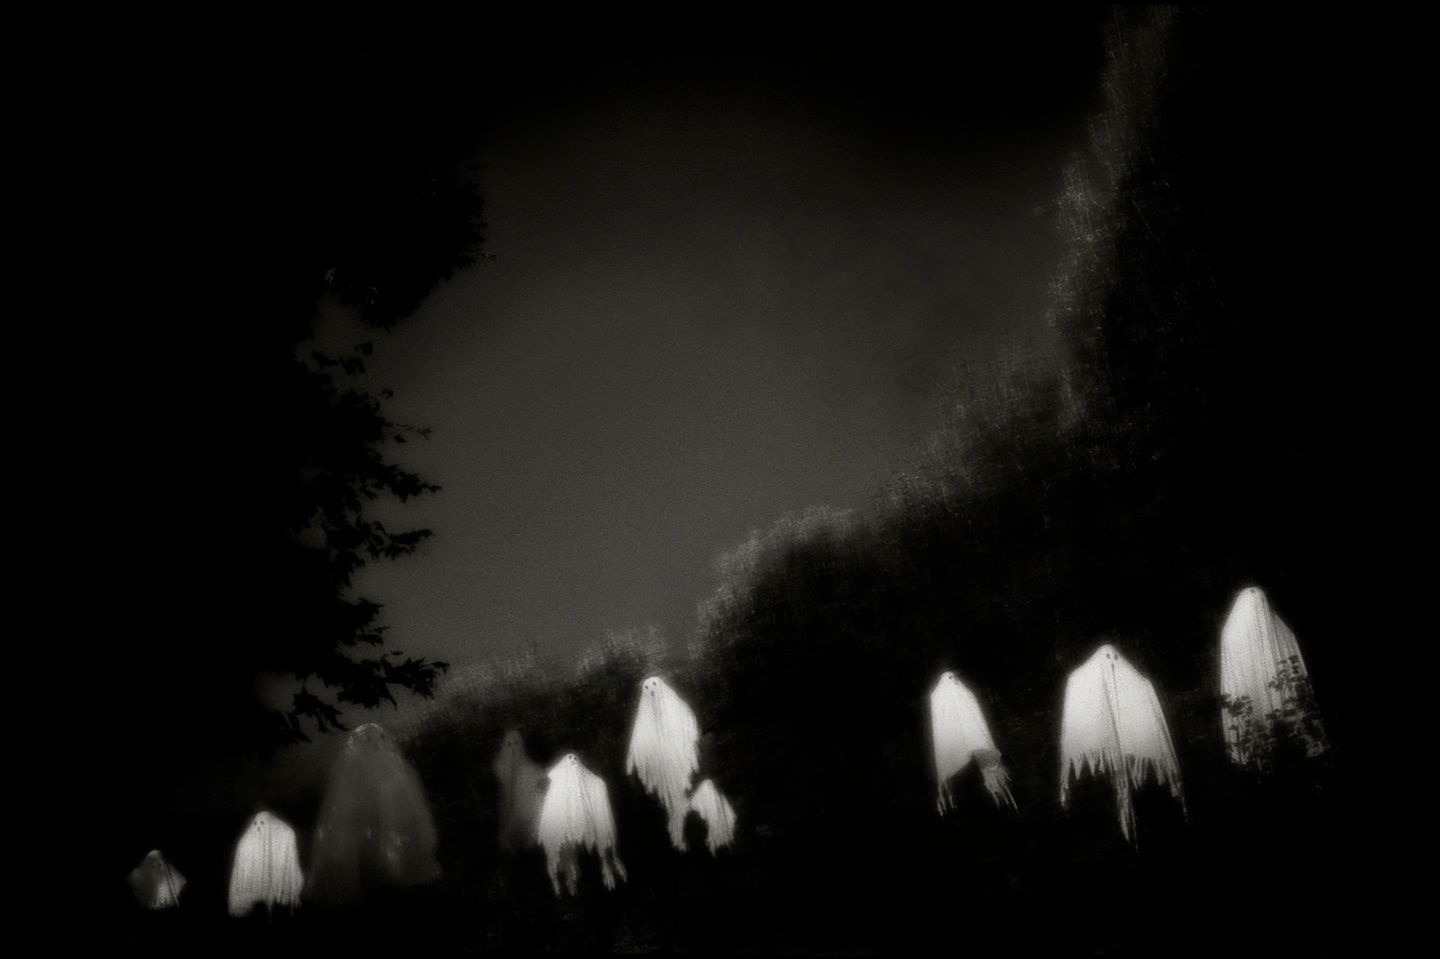 A black and white photo of trees in the dark.